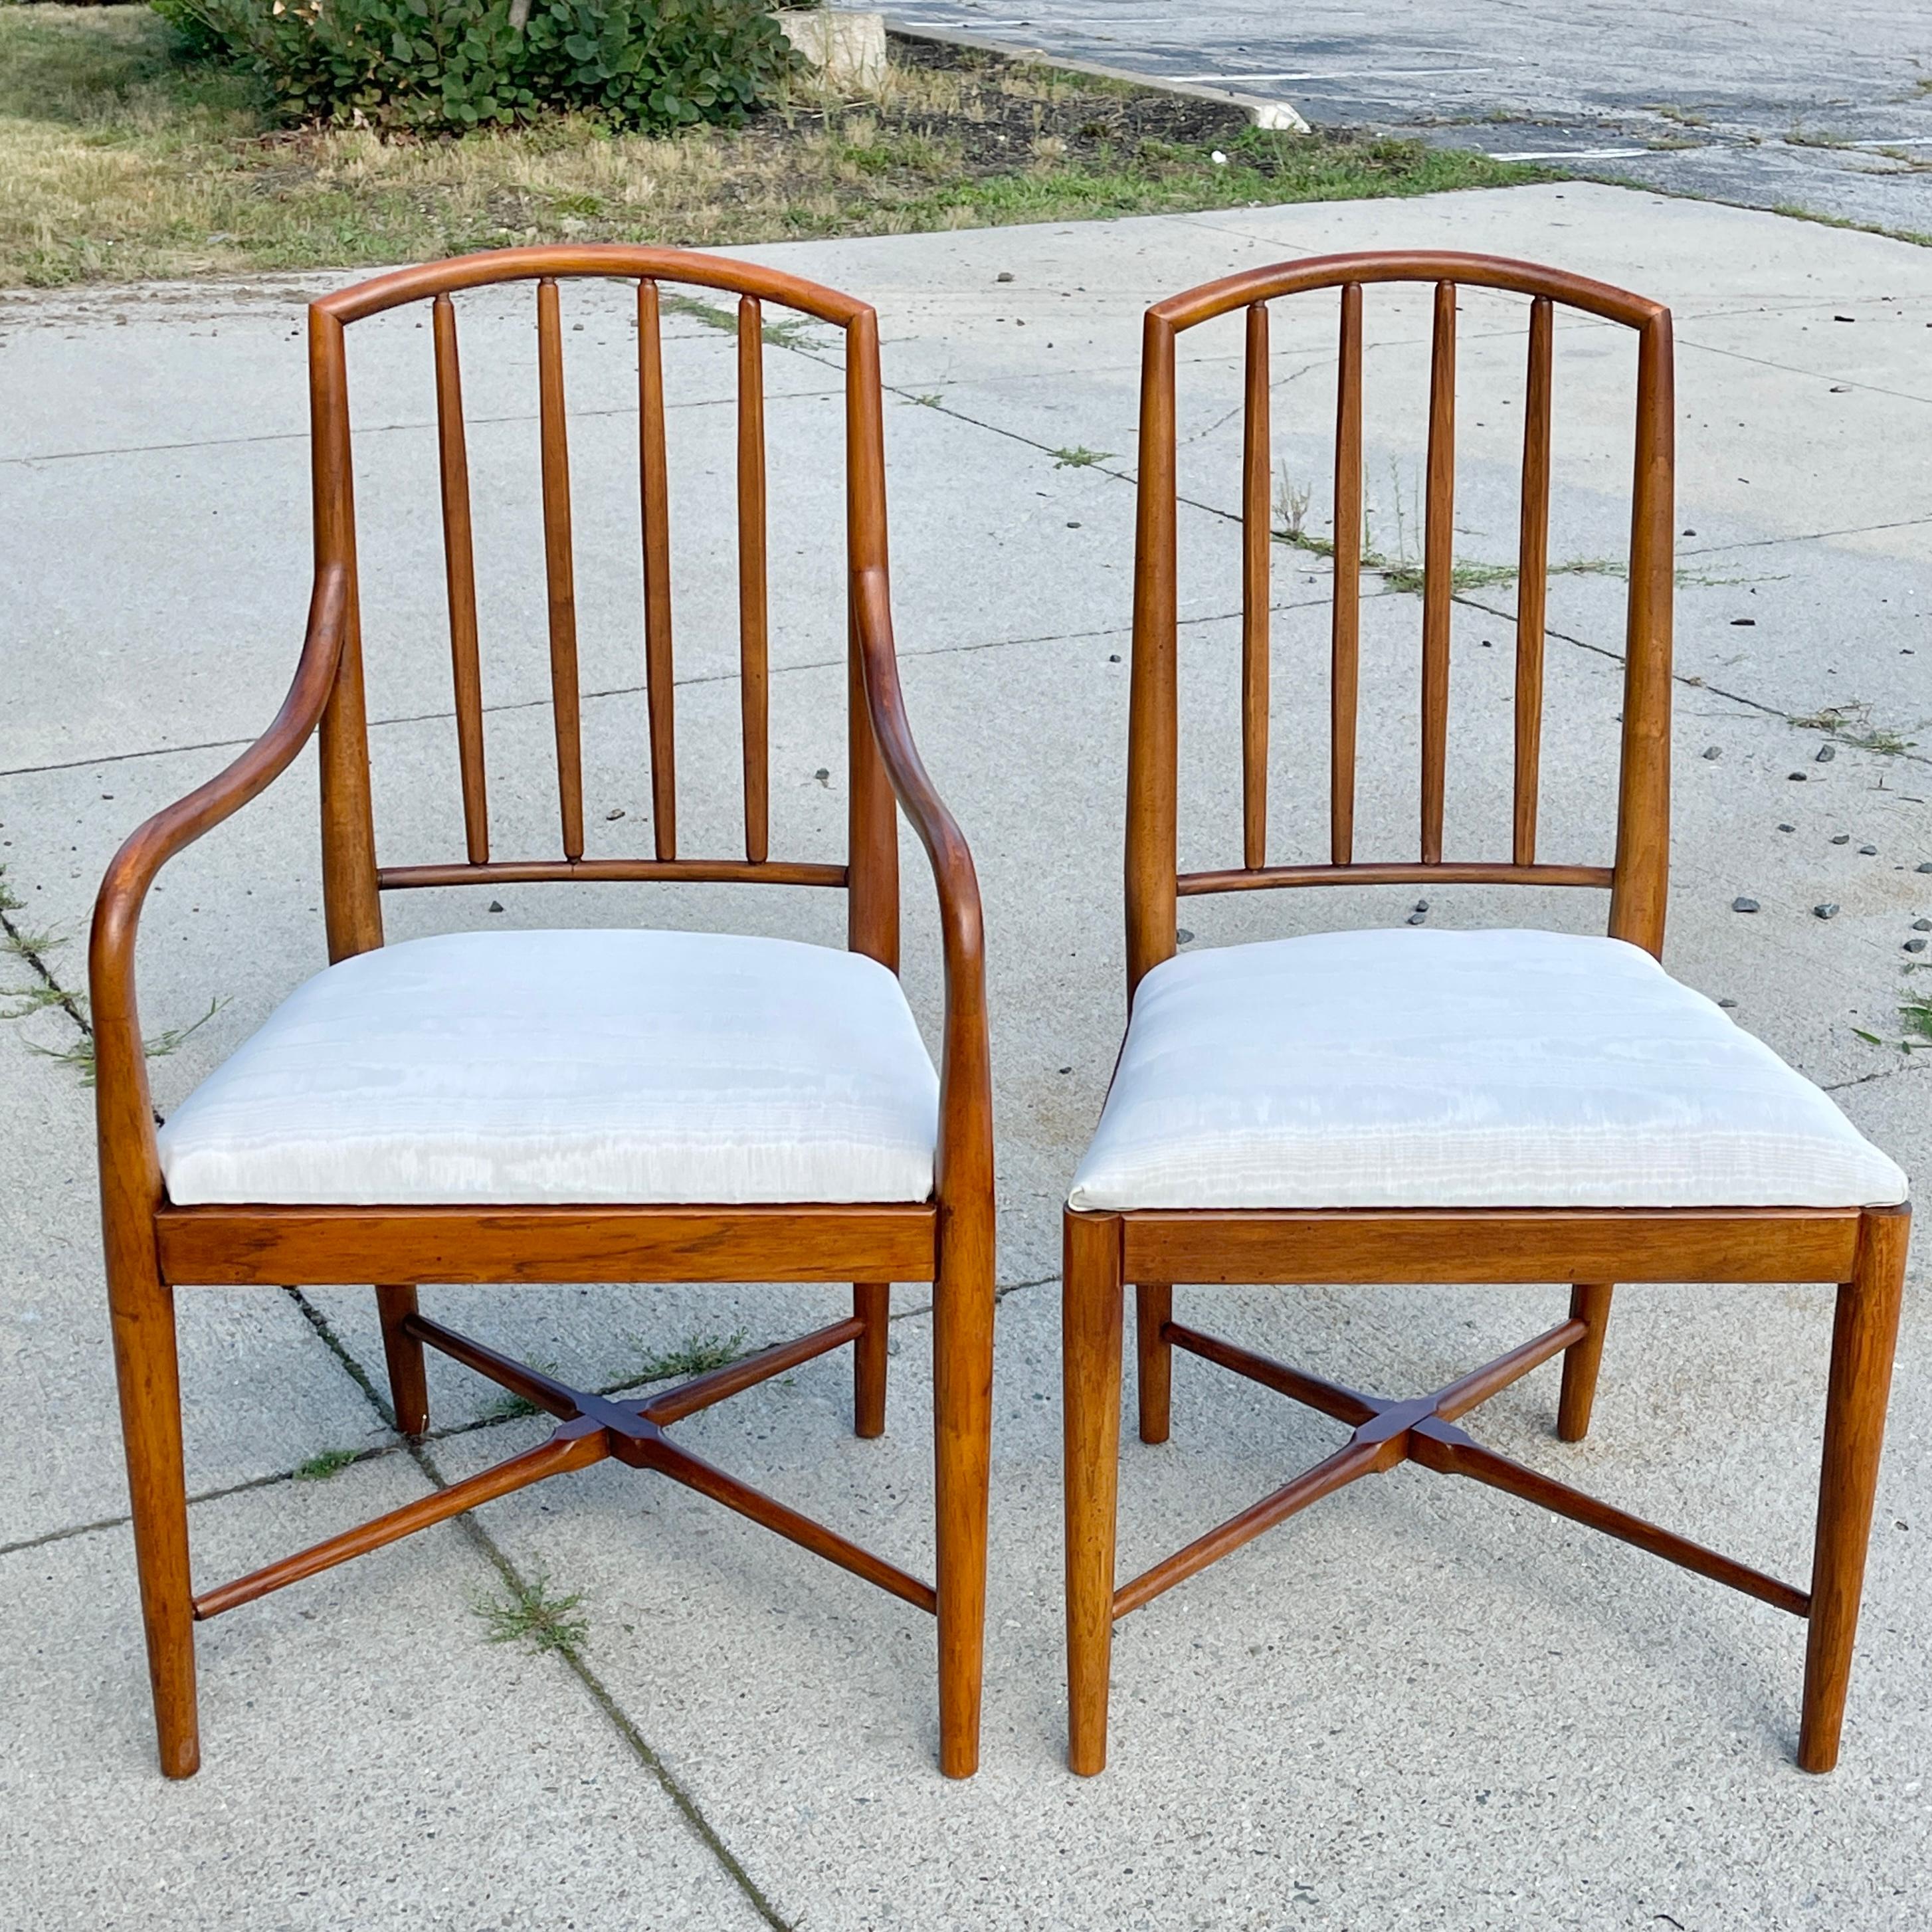 Seven sinewy curved walnut spindle-back dining chairs; 2 arm chairs and 5 side chairs, exceptionally well made (note cross-stretchers and tightness of joints, curved swan-like arms, hex blocks and bowed spindle rails). 
Maker unknown but clearly in